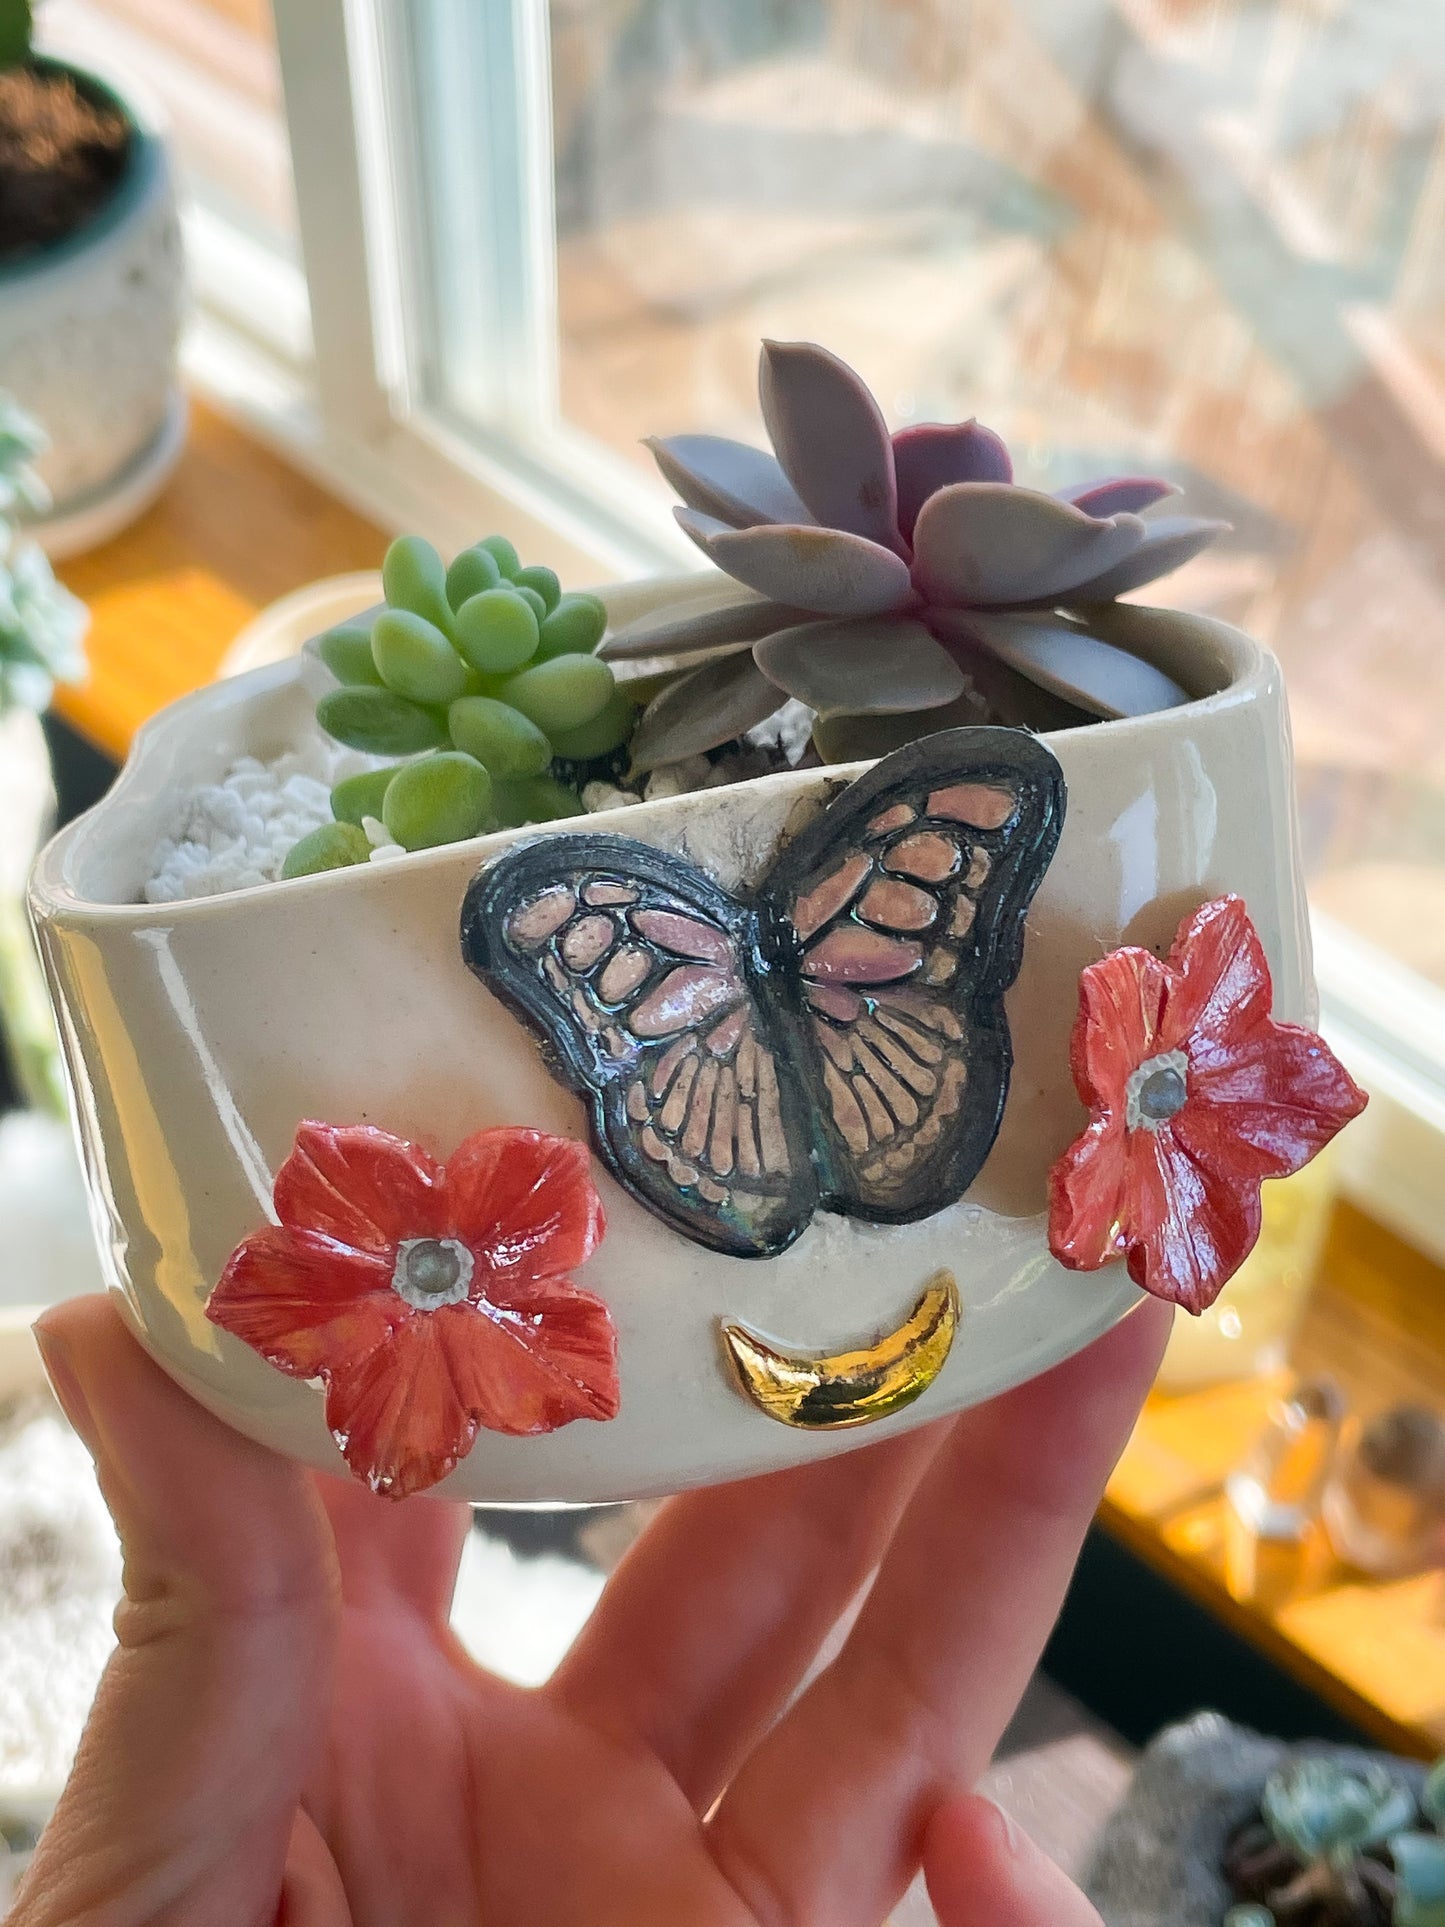 Butterfly & Moon succulent Planter or Smudge Pot